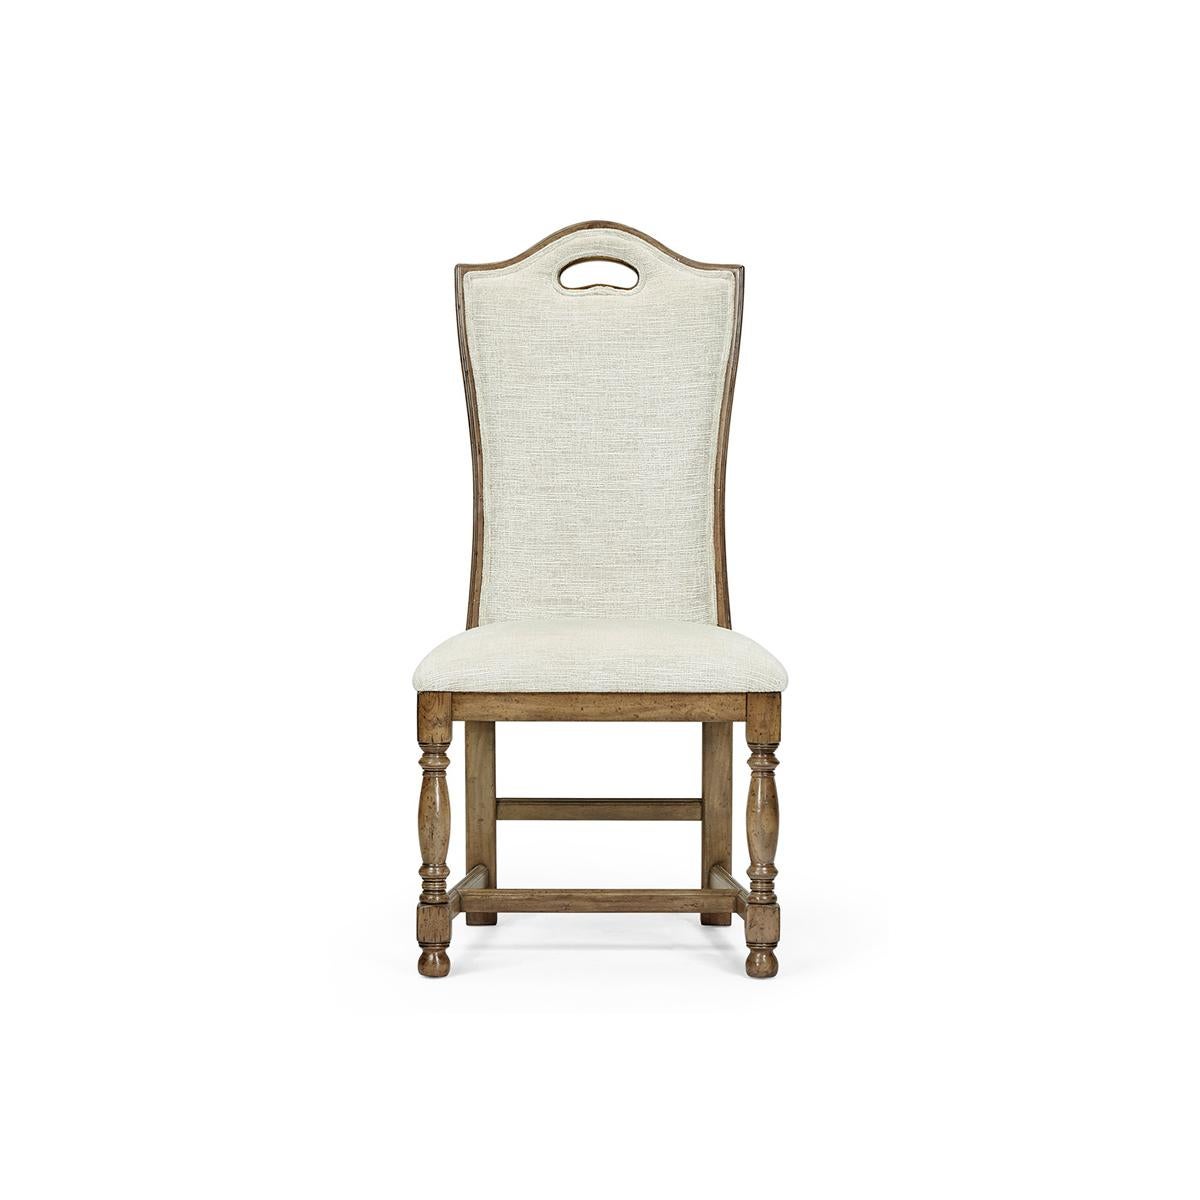 Introducing the magnificent William and Mary high back dining chair - a perfect blend of elegance and comfort. This dining chair is the epitome of sophistication, with its medium driftwood finish, high backrest and plush upholstery. The beautifully